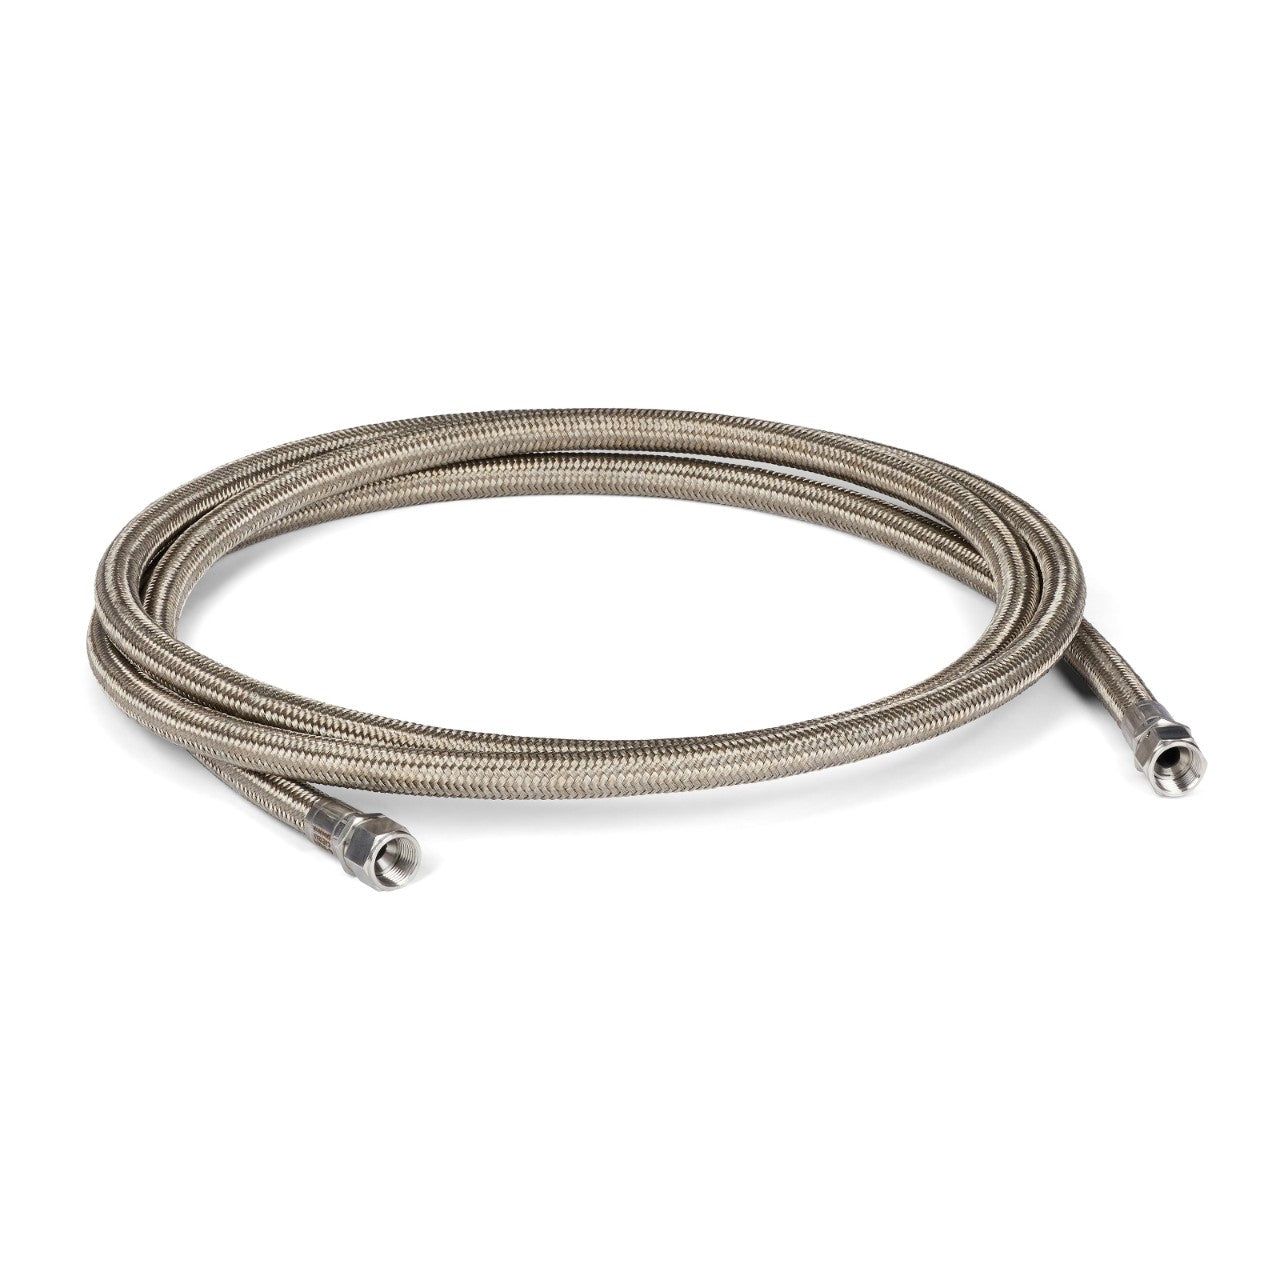 15 ft. (4.6 M) Stainless Steel Braided PTFE Ambient Hose,  No. 12 (0.617 in. / 15.7 mm ID)